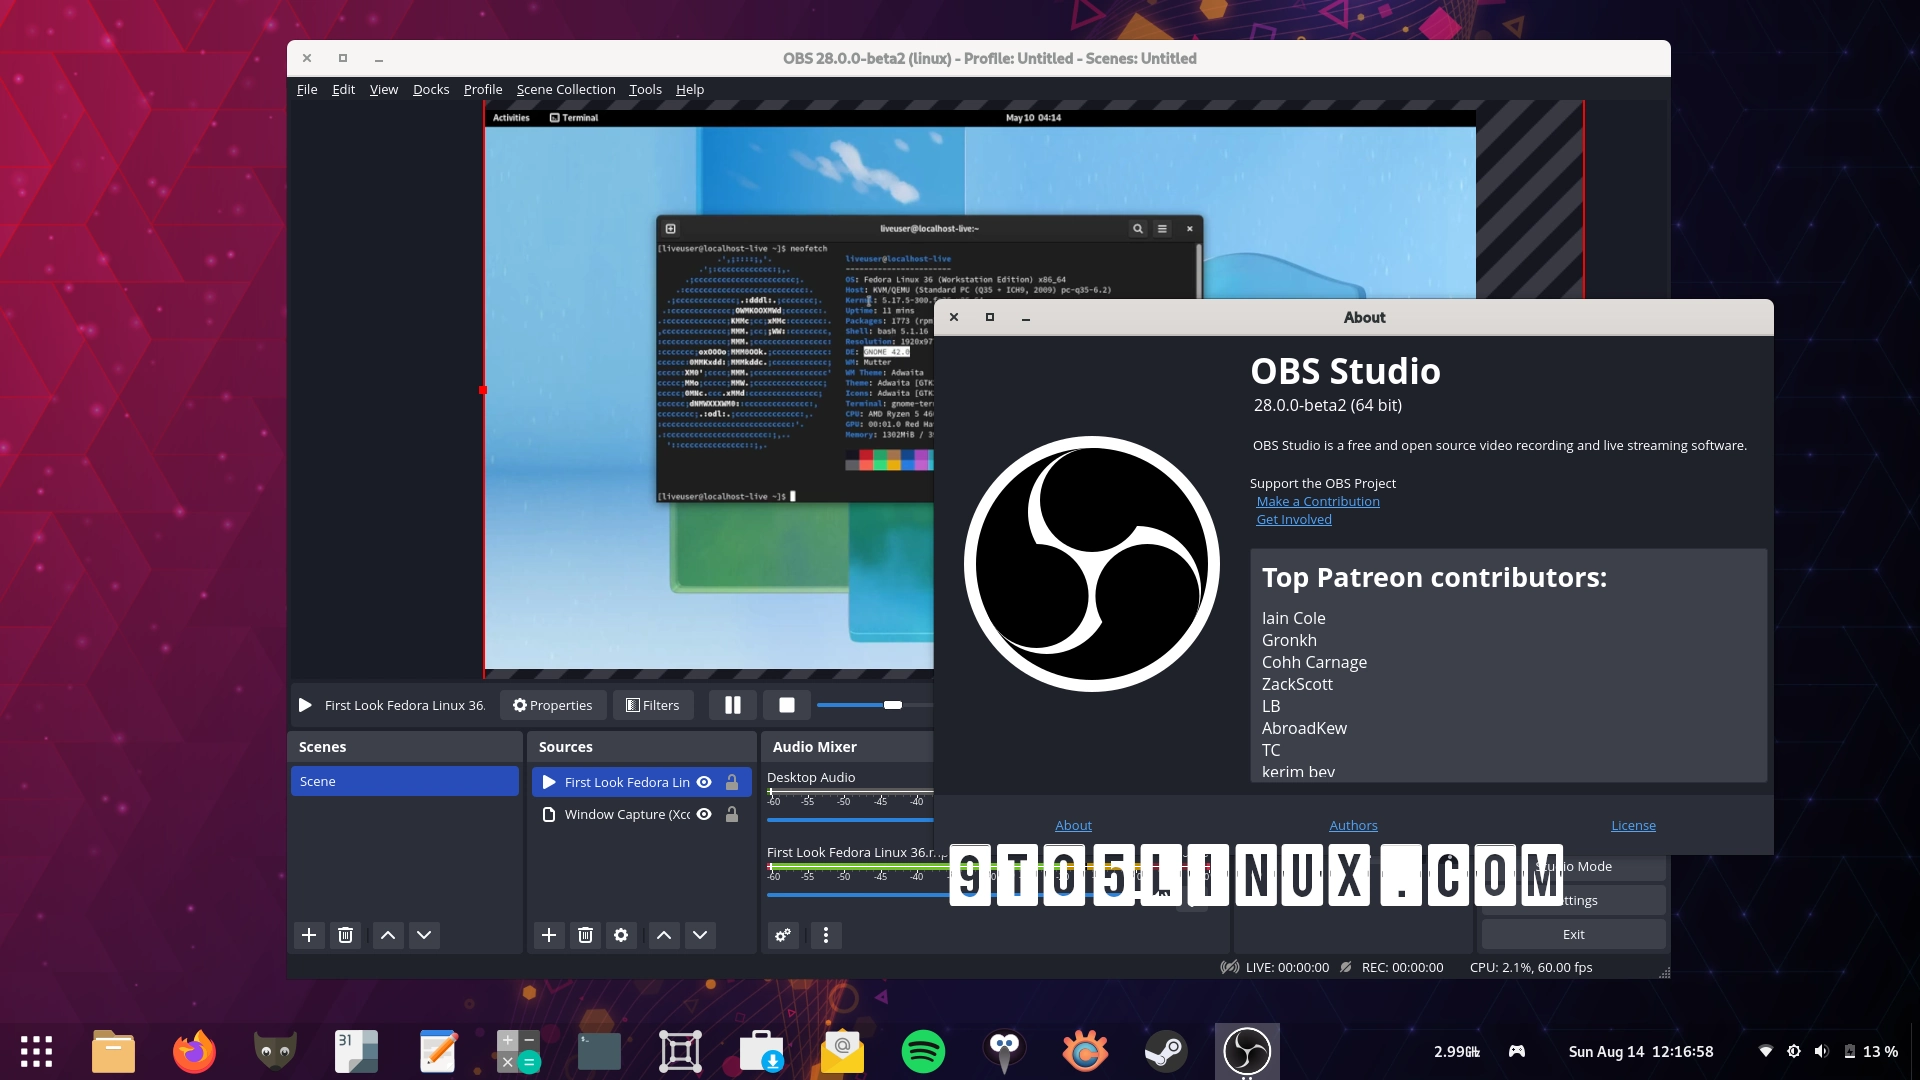 OBS Studio 28.0 Promises 10-Bit Color Support and HDR Video Encoding, Qt 6 Port, and More